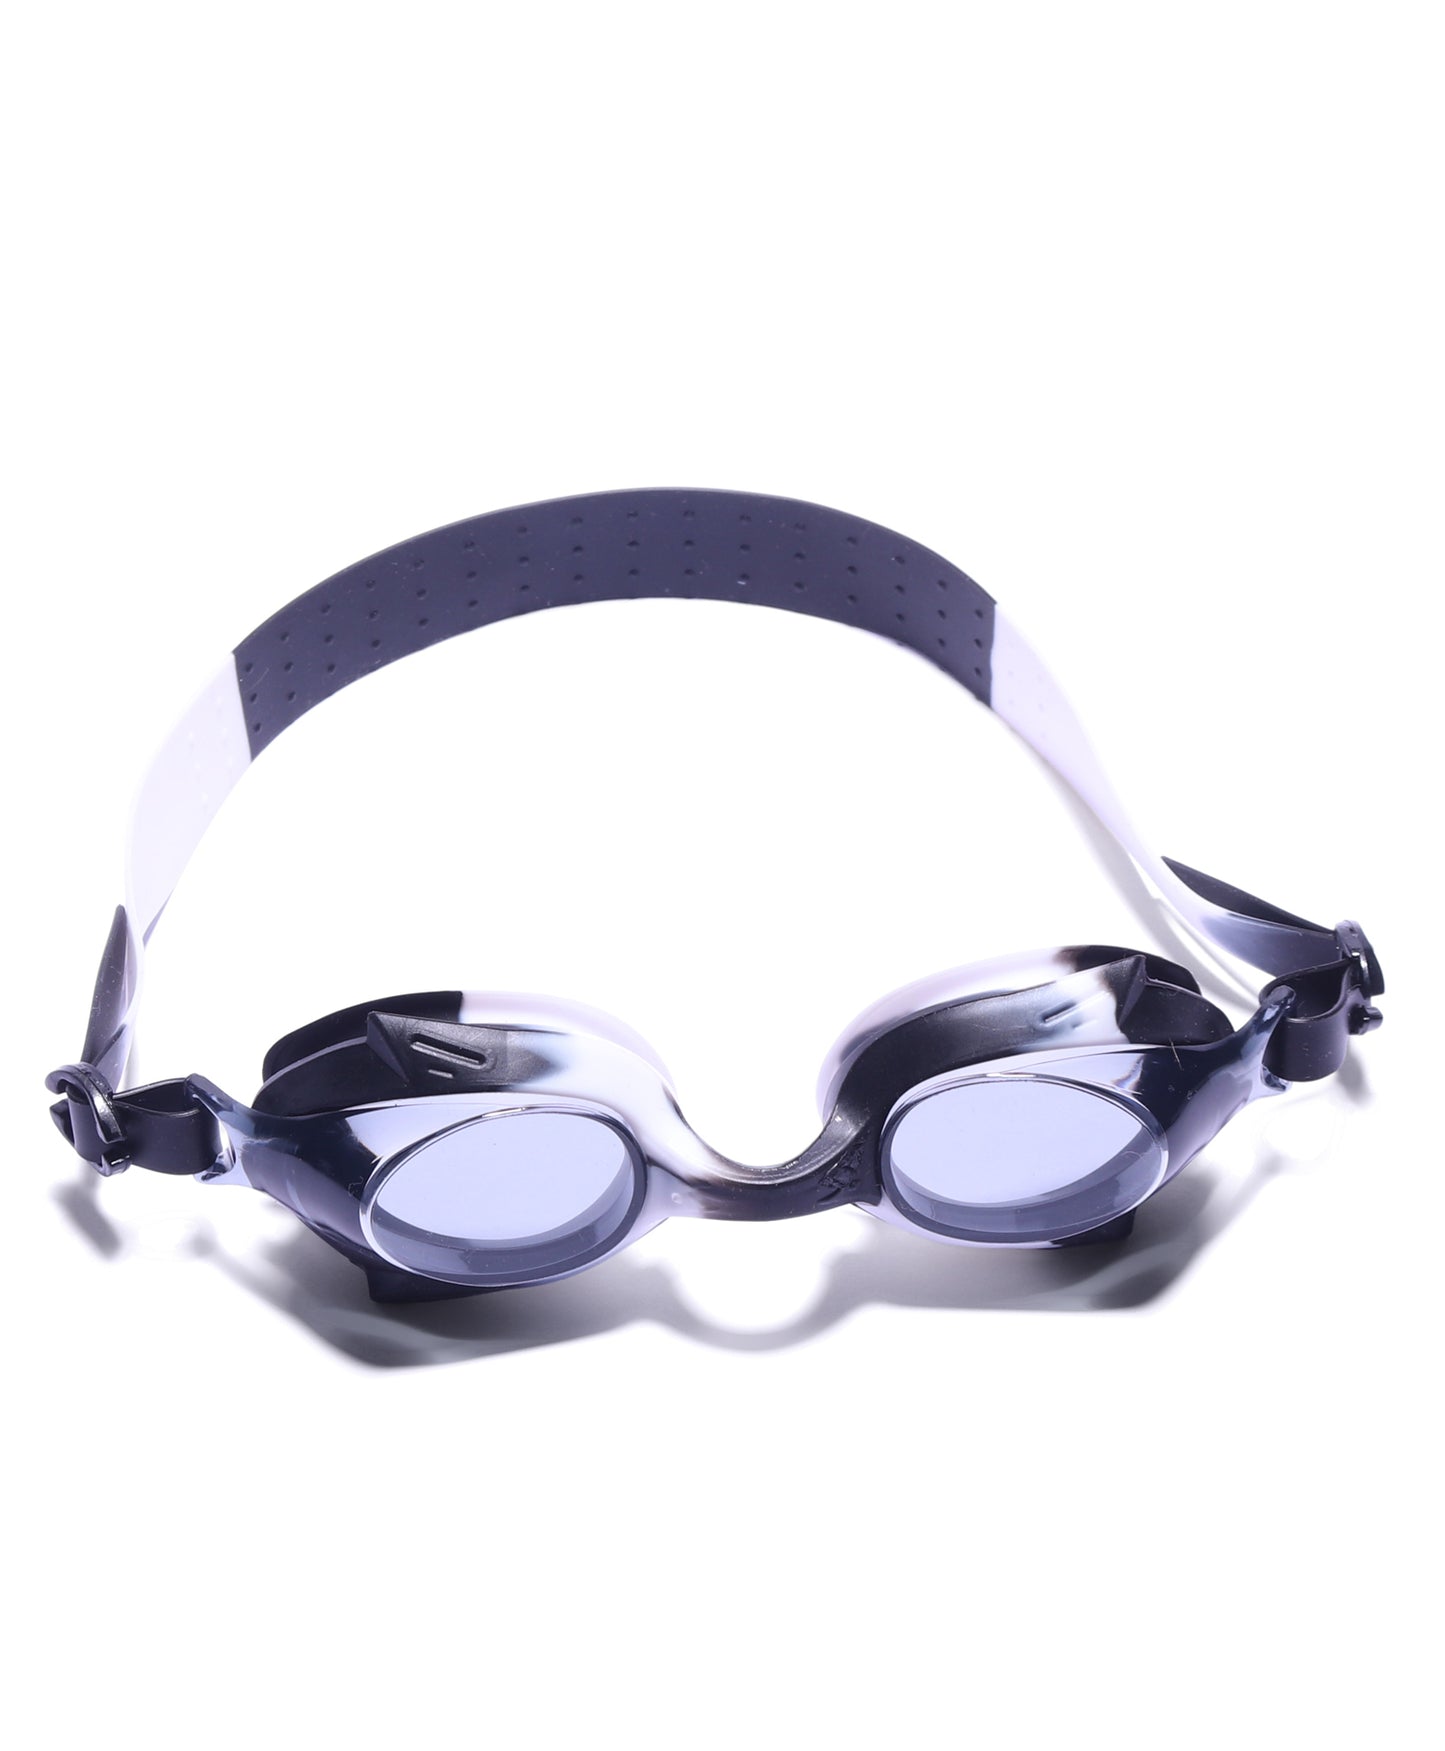 DUAL SHADED SWIMMING GOGGLES - WHITE & BLACK